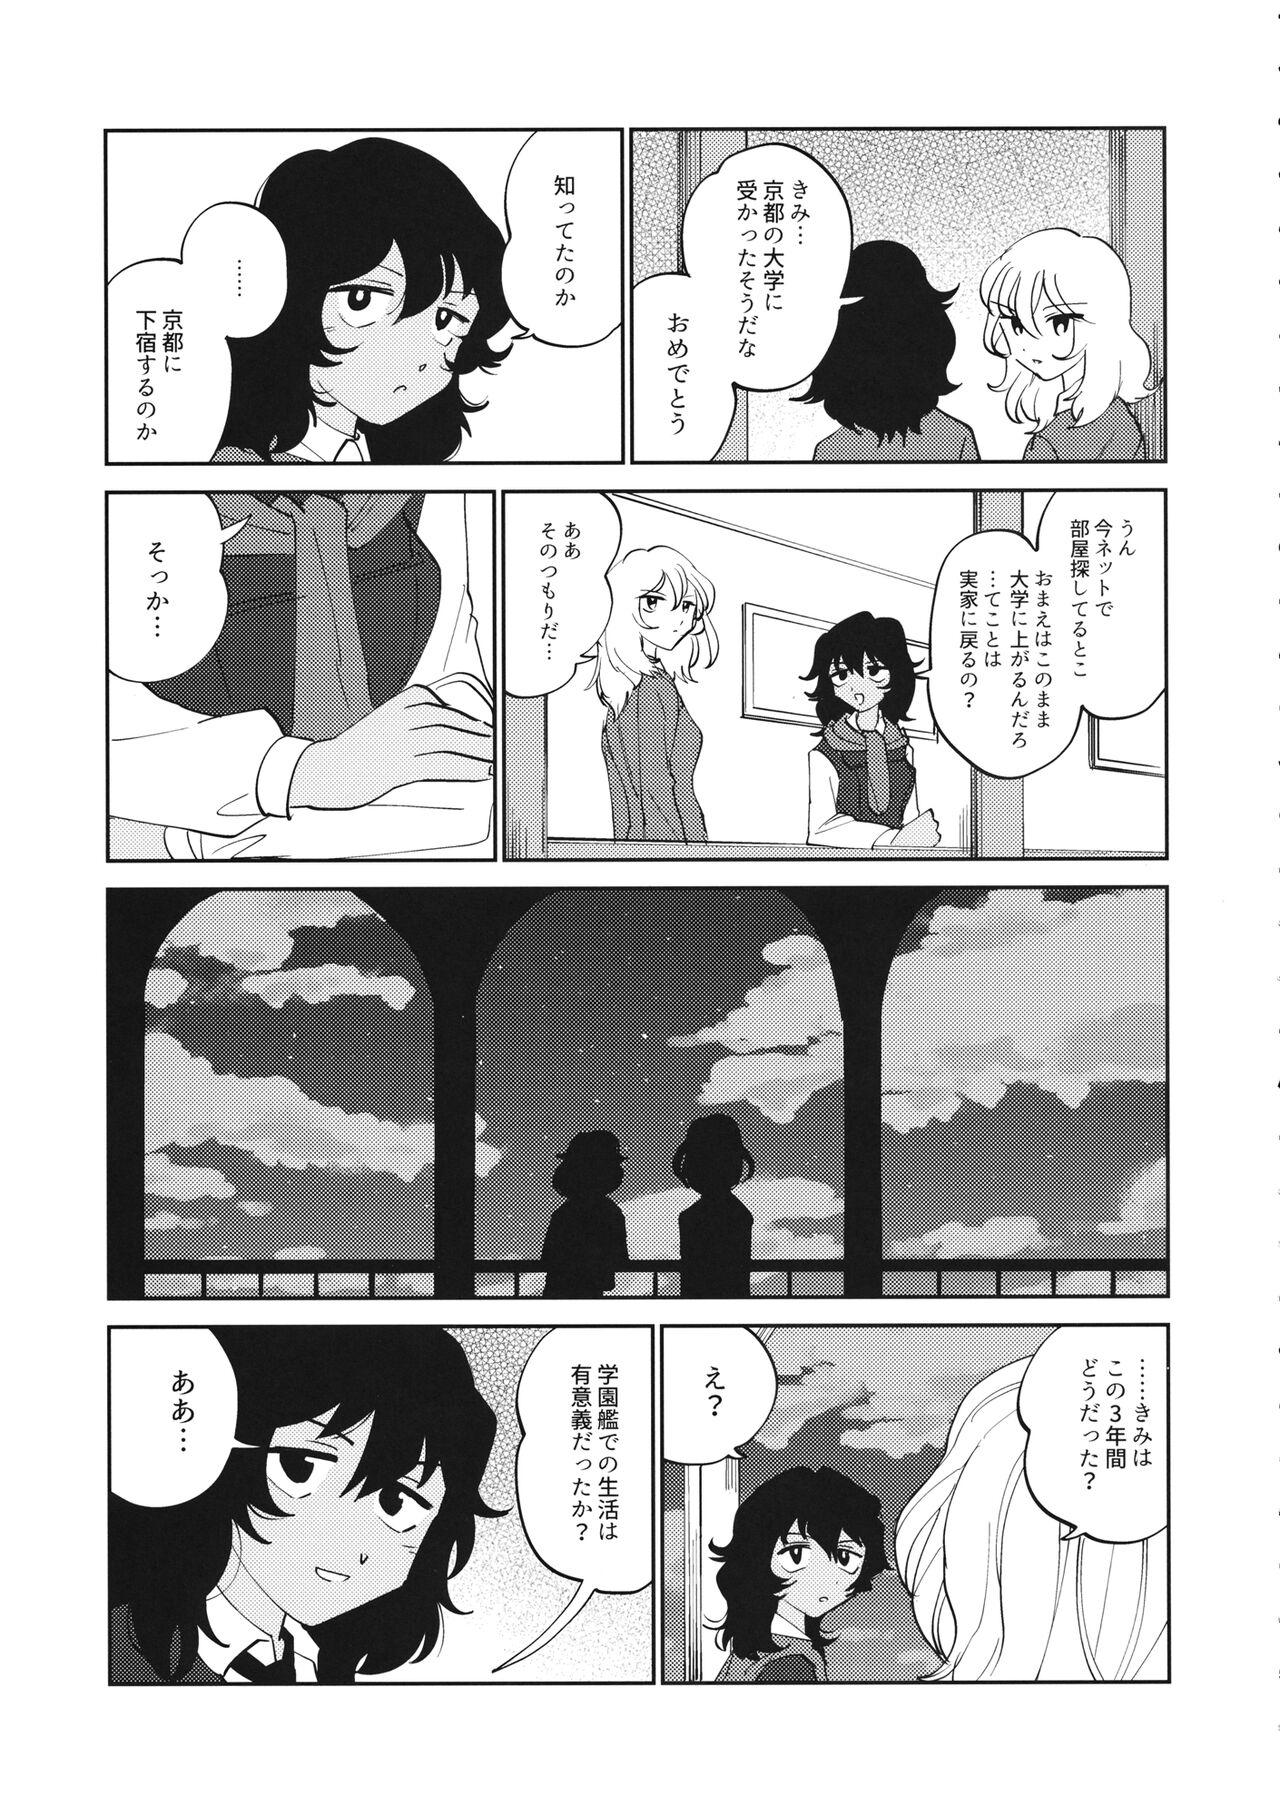 Wet FOR HERE OR TO GO? - Girls und panzer Slapping - Page 6